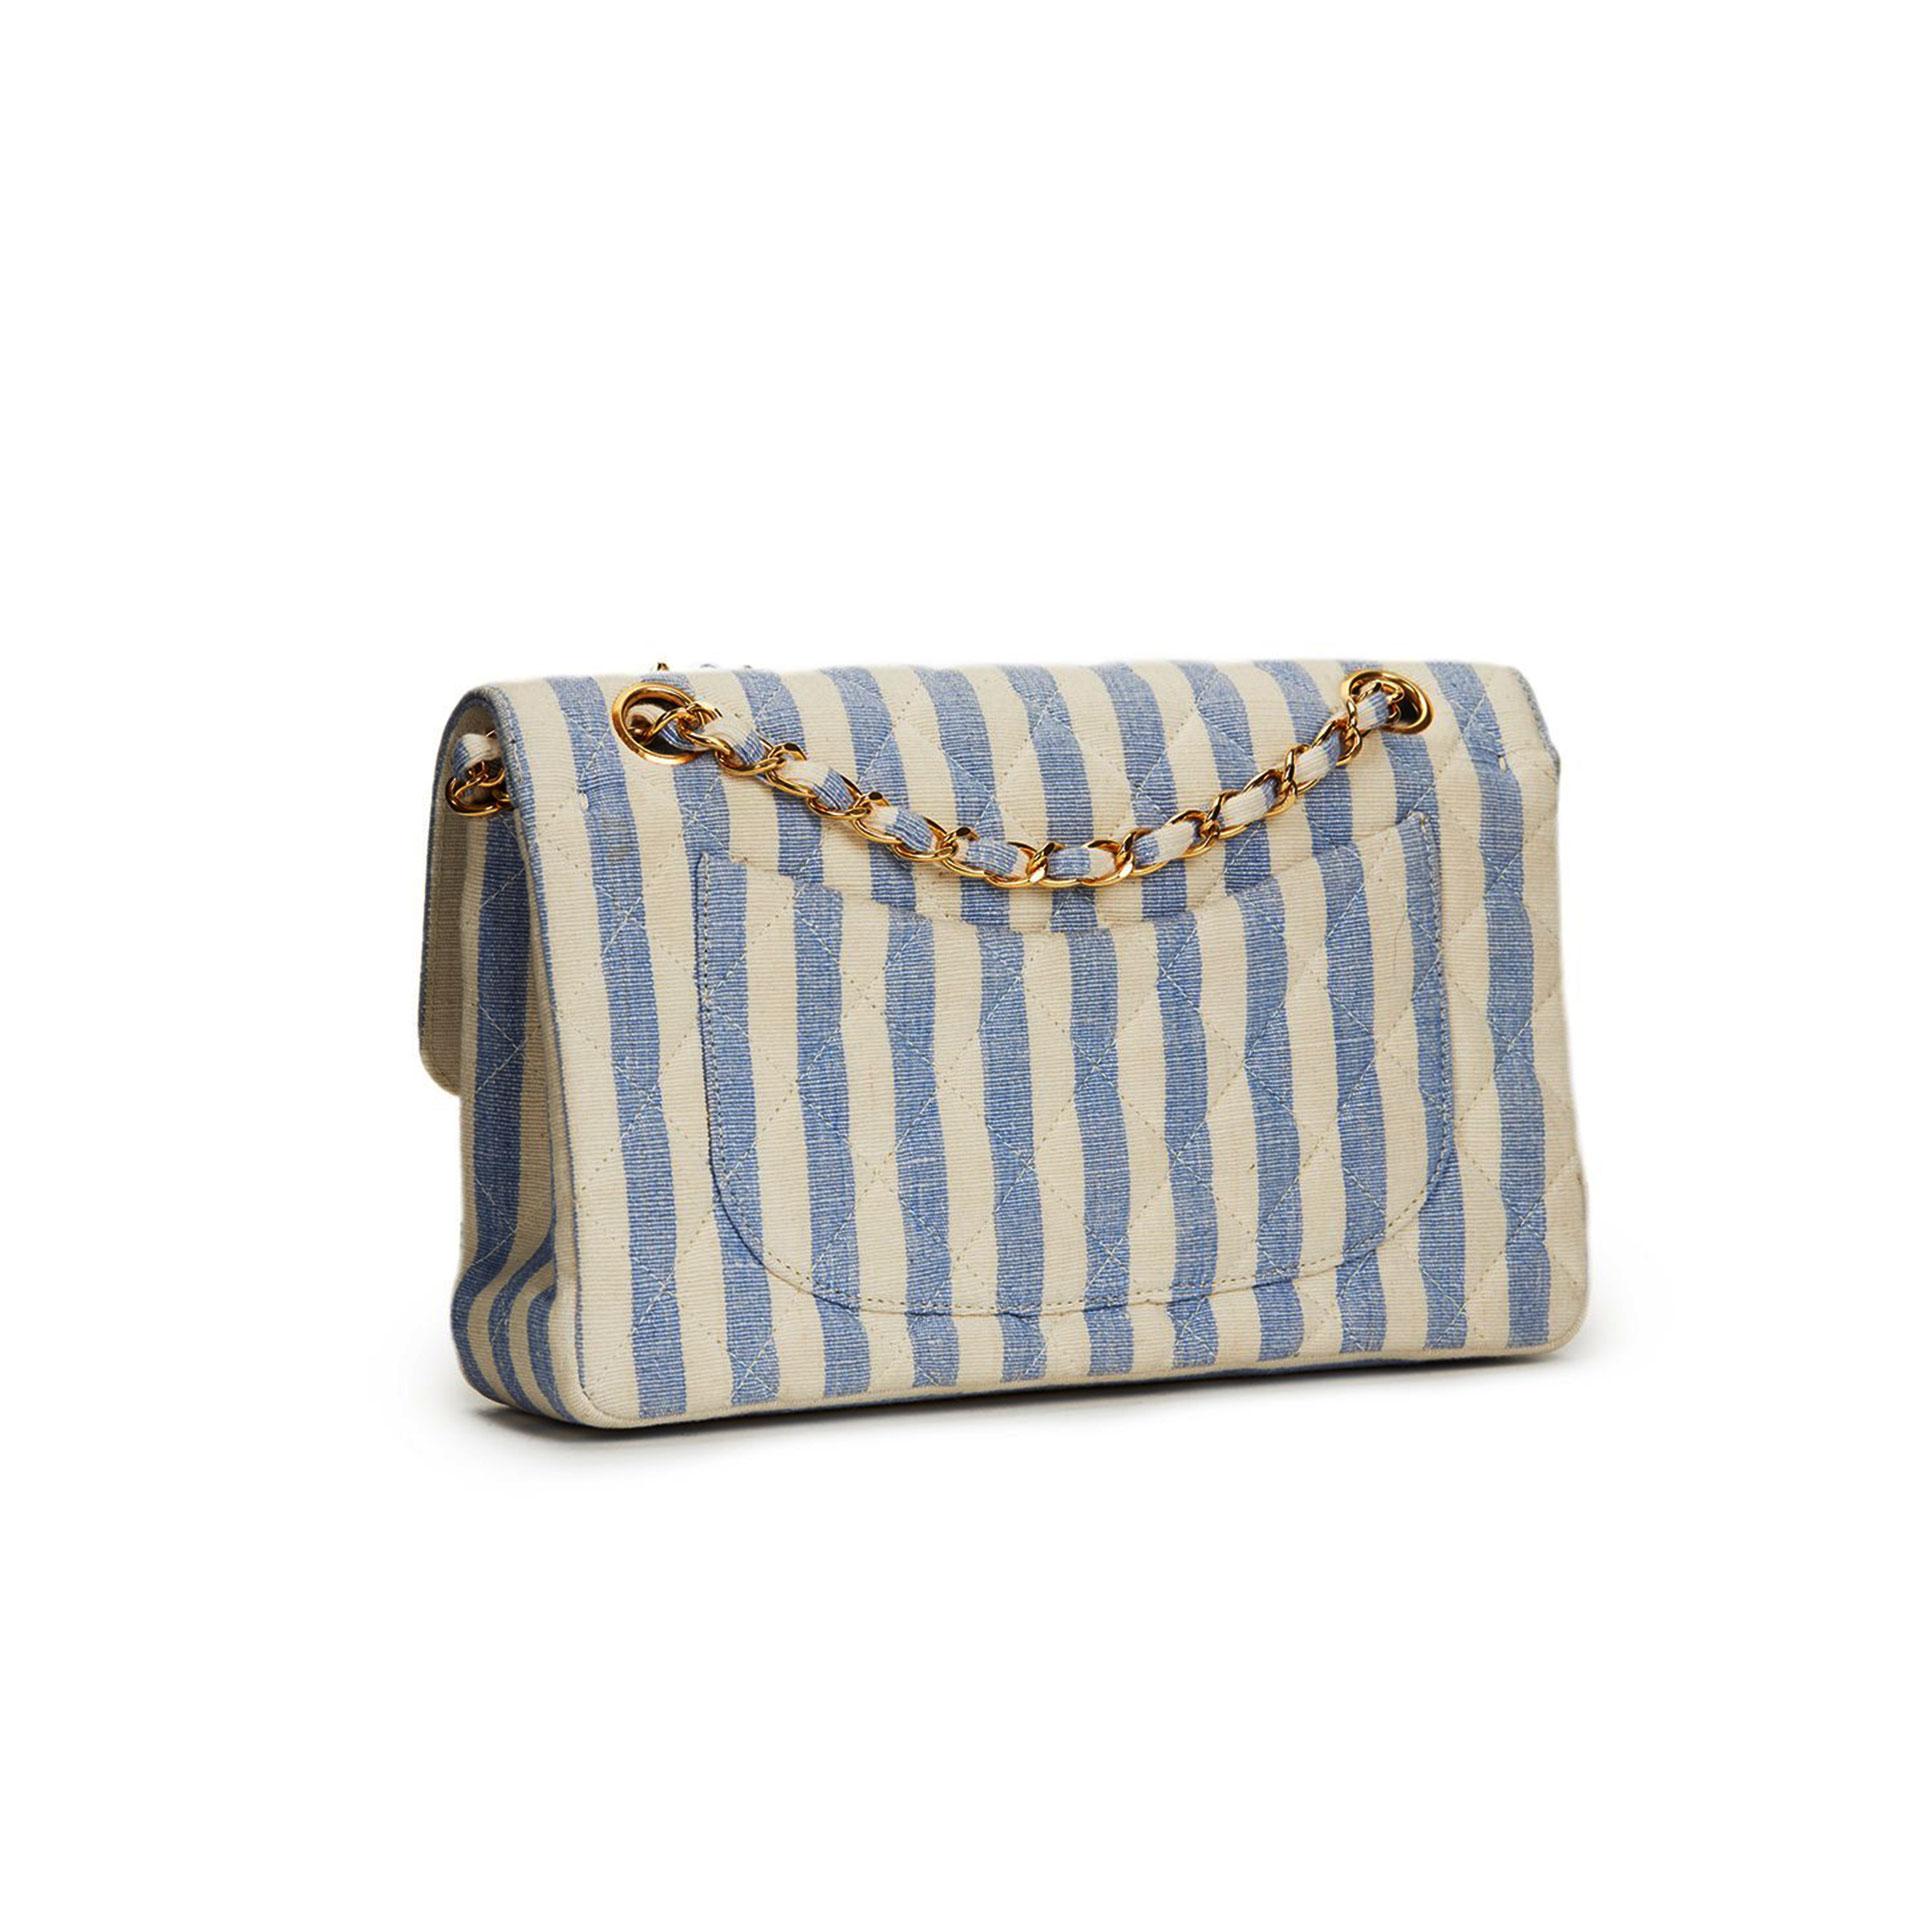 Chanel Classic Flap Vintage 90s Striped Rare Blue and White Linen & Cotton Shoulder Bag

1990 {VINTAGE 29 Years}
24K Gold plated hardware
Linen and cotton blend
Diamond stitch with striped light blue and white pattern
Double flap with leather ivory